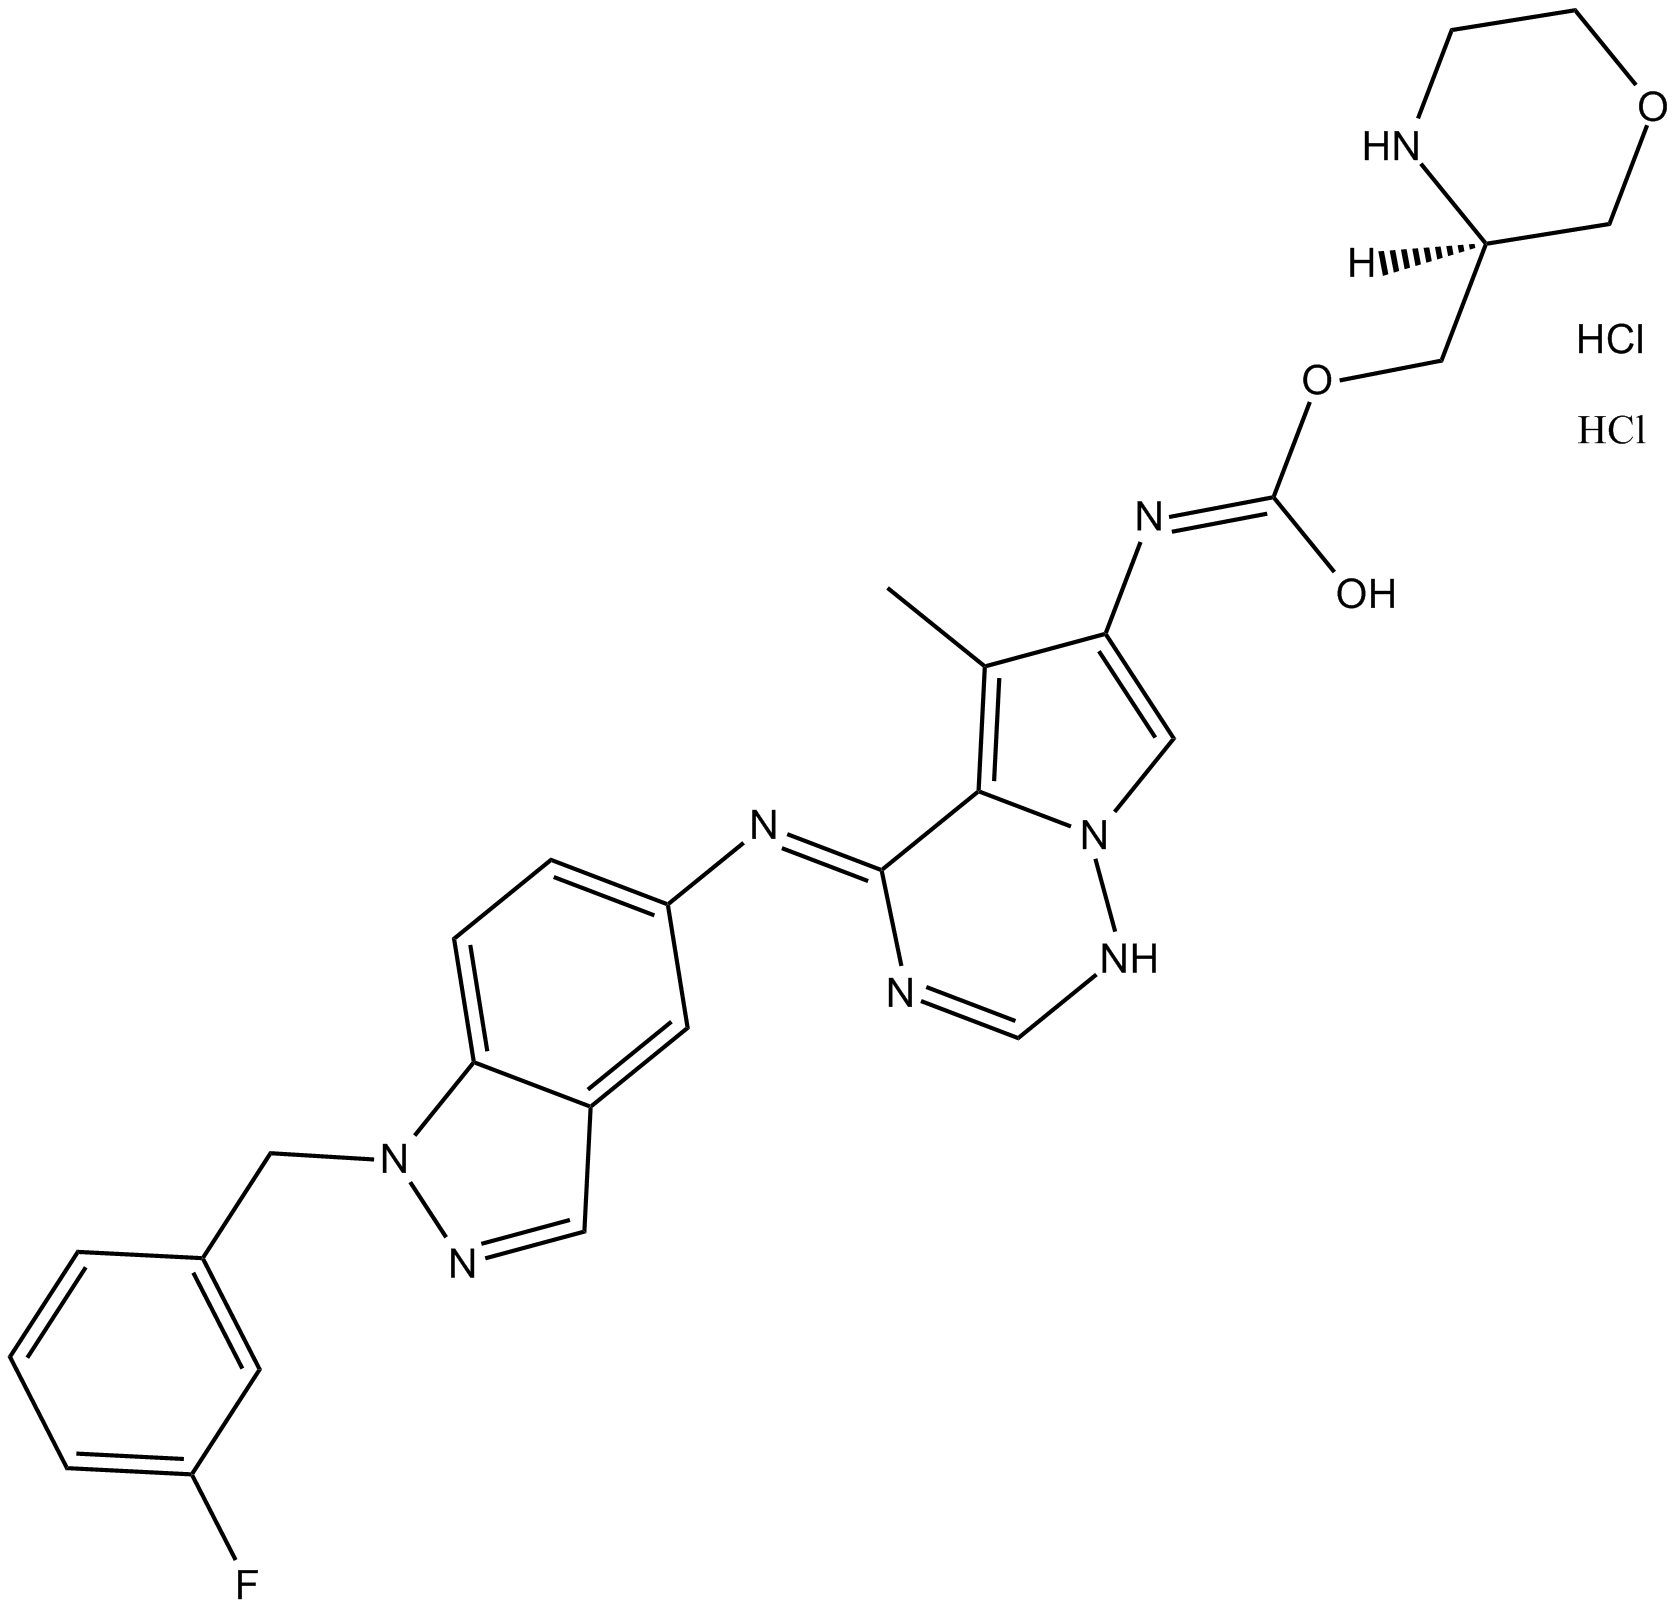 BMS 599626 dihydrochloride  Chemical Structure